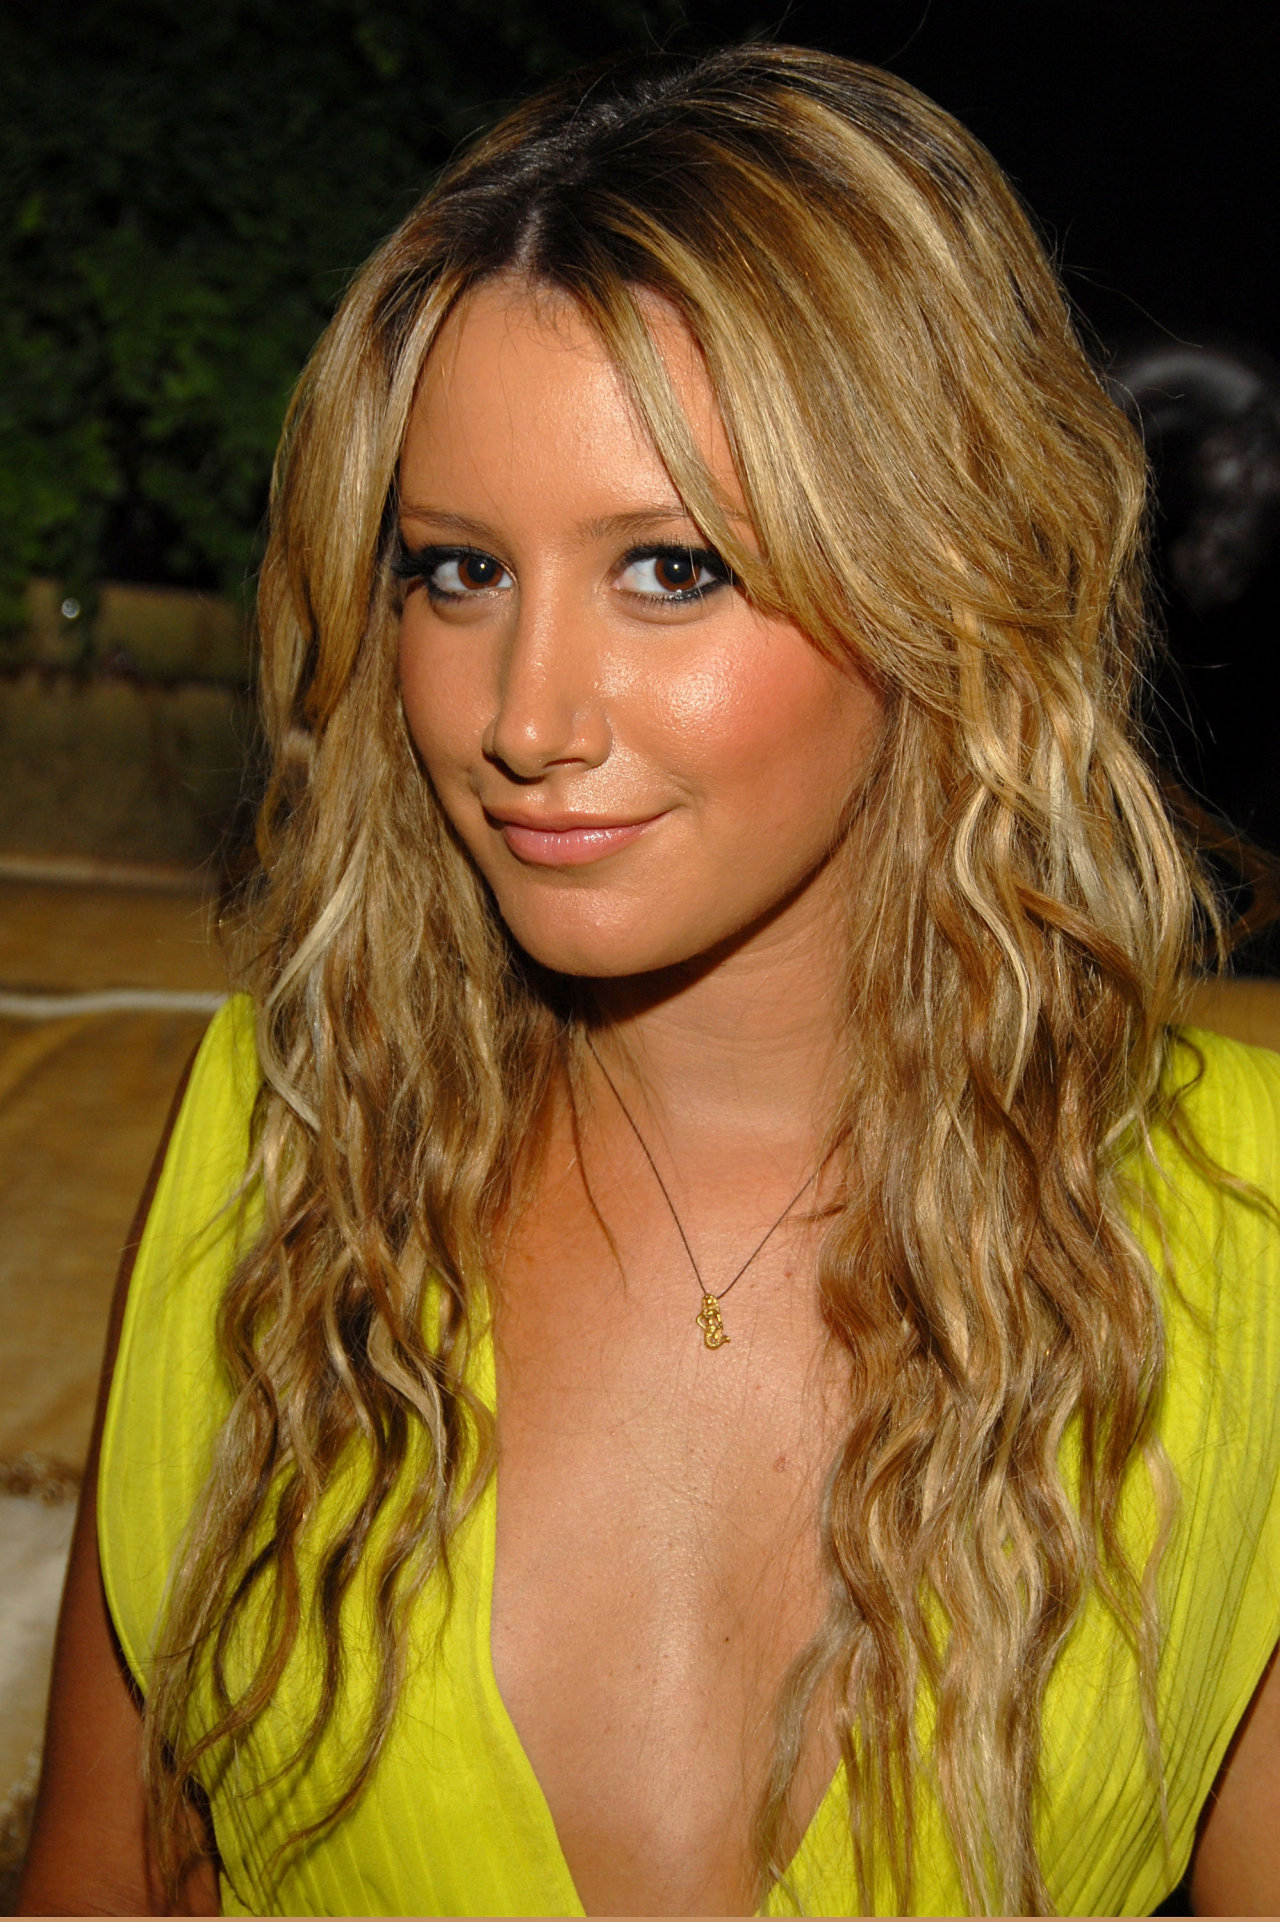 Best Ashley Tisdale pictures.